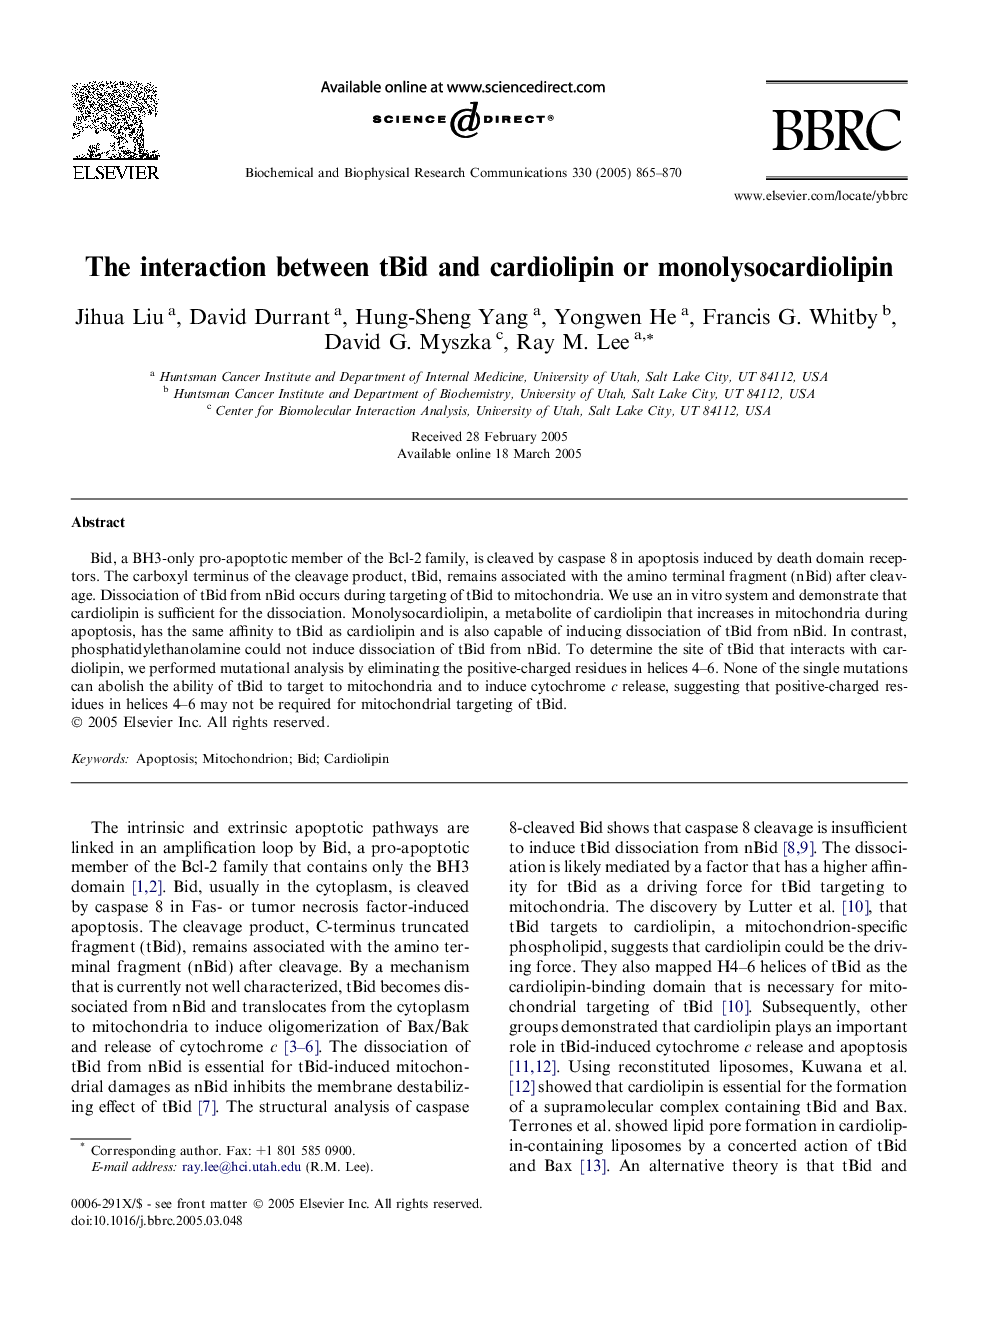 The interaction between tBid and cardiolipin or monolysocardiolipin